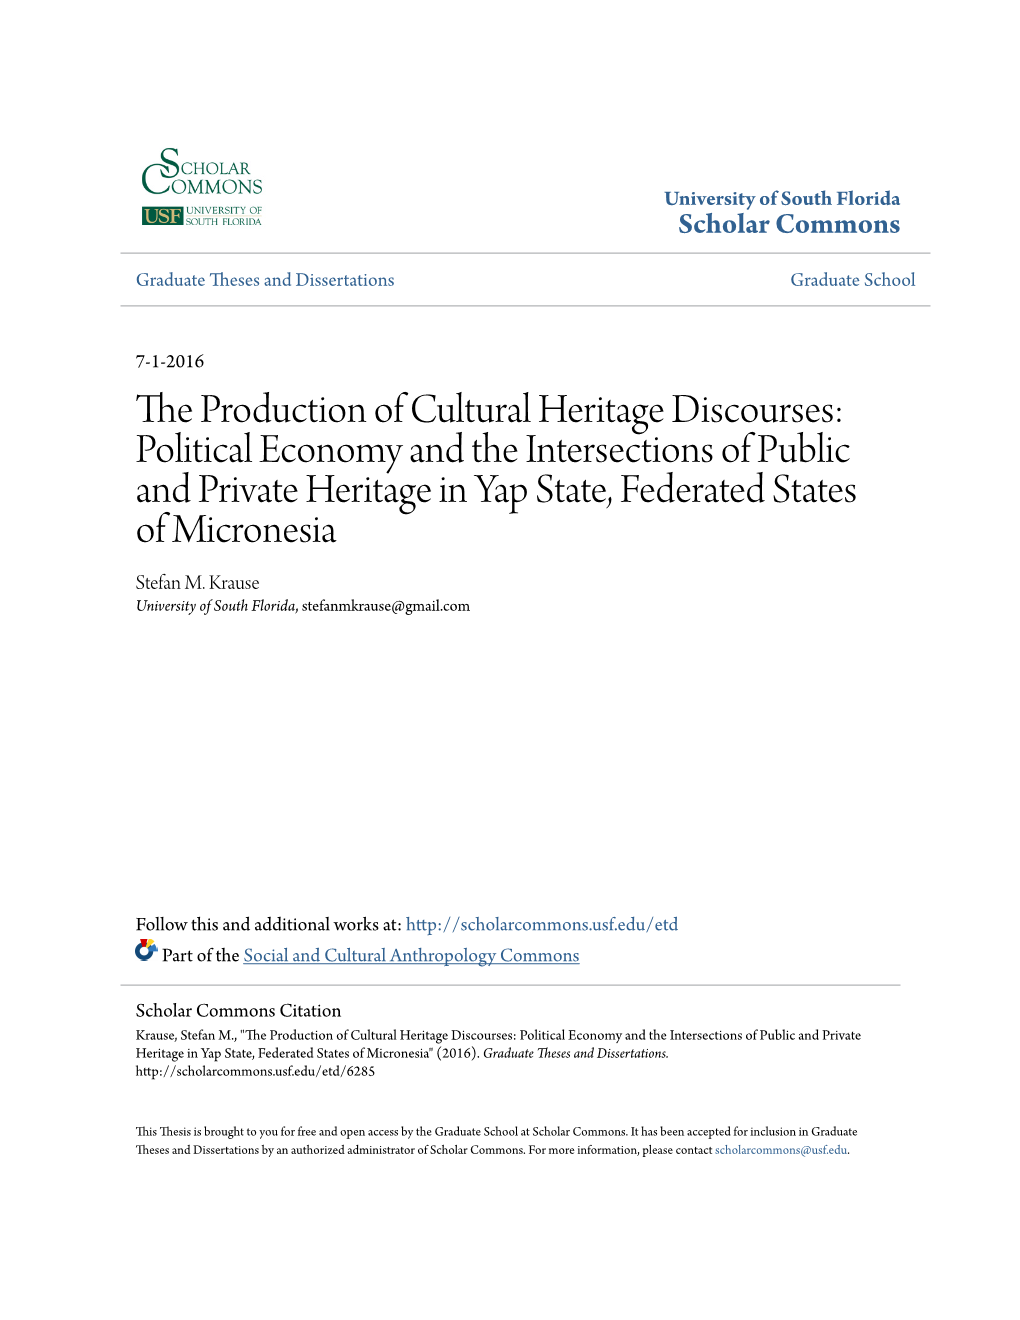 The Production of Cultural Heritage Discourses: Political Economy and The